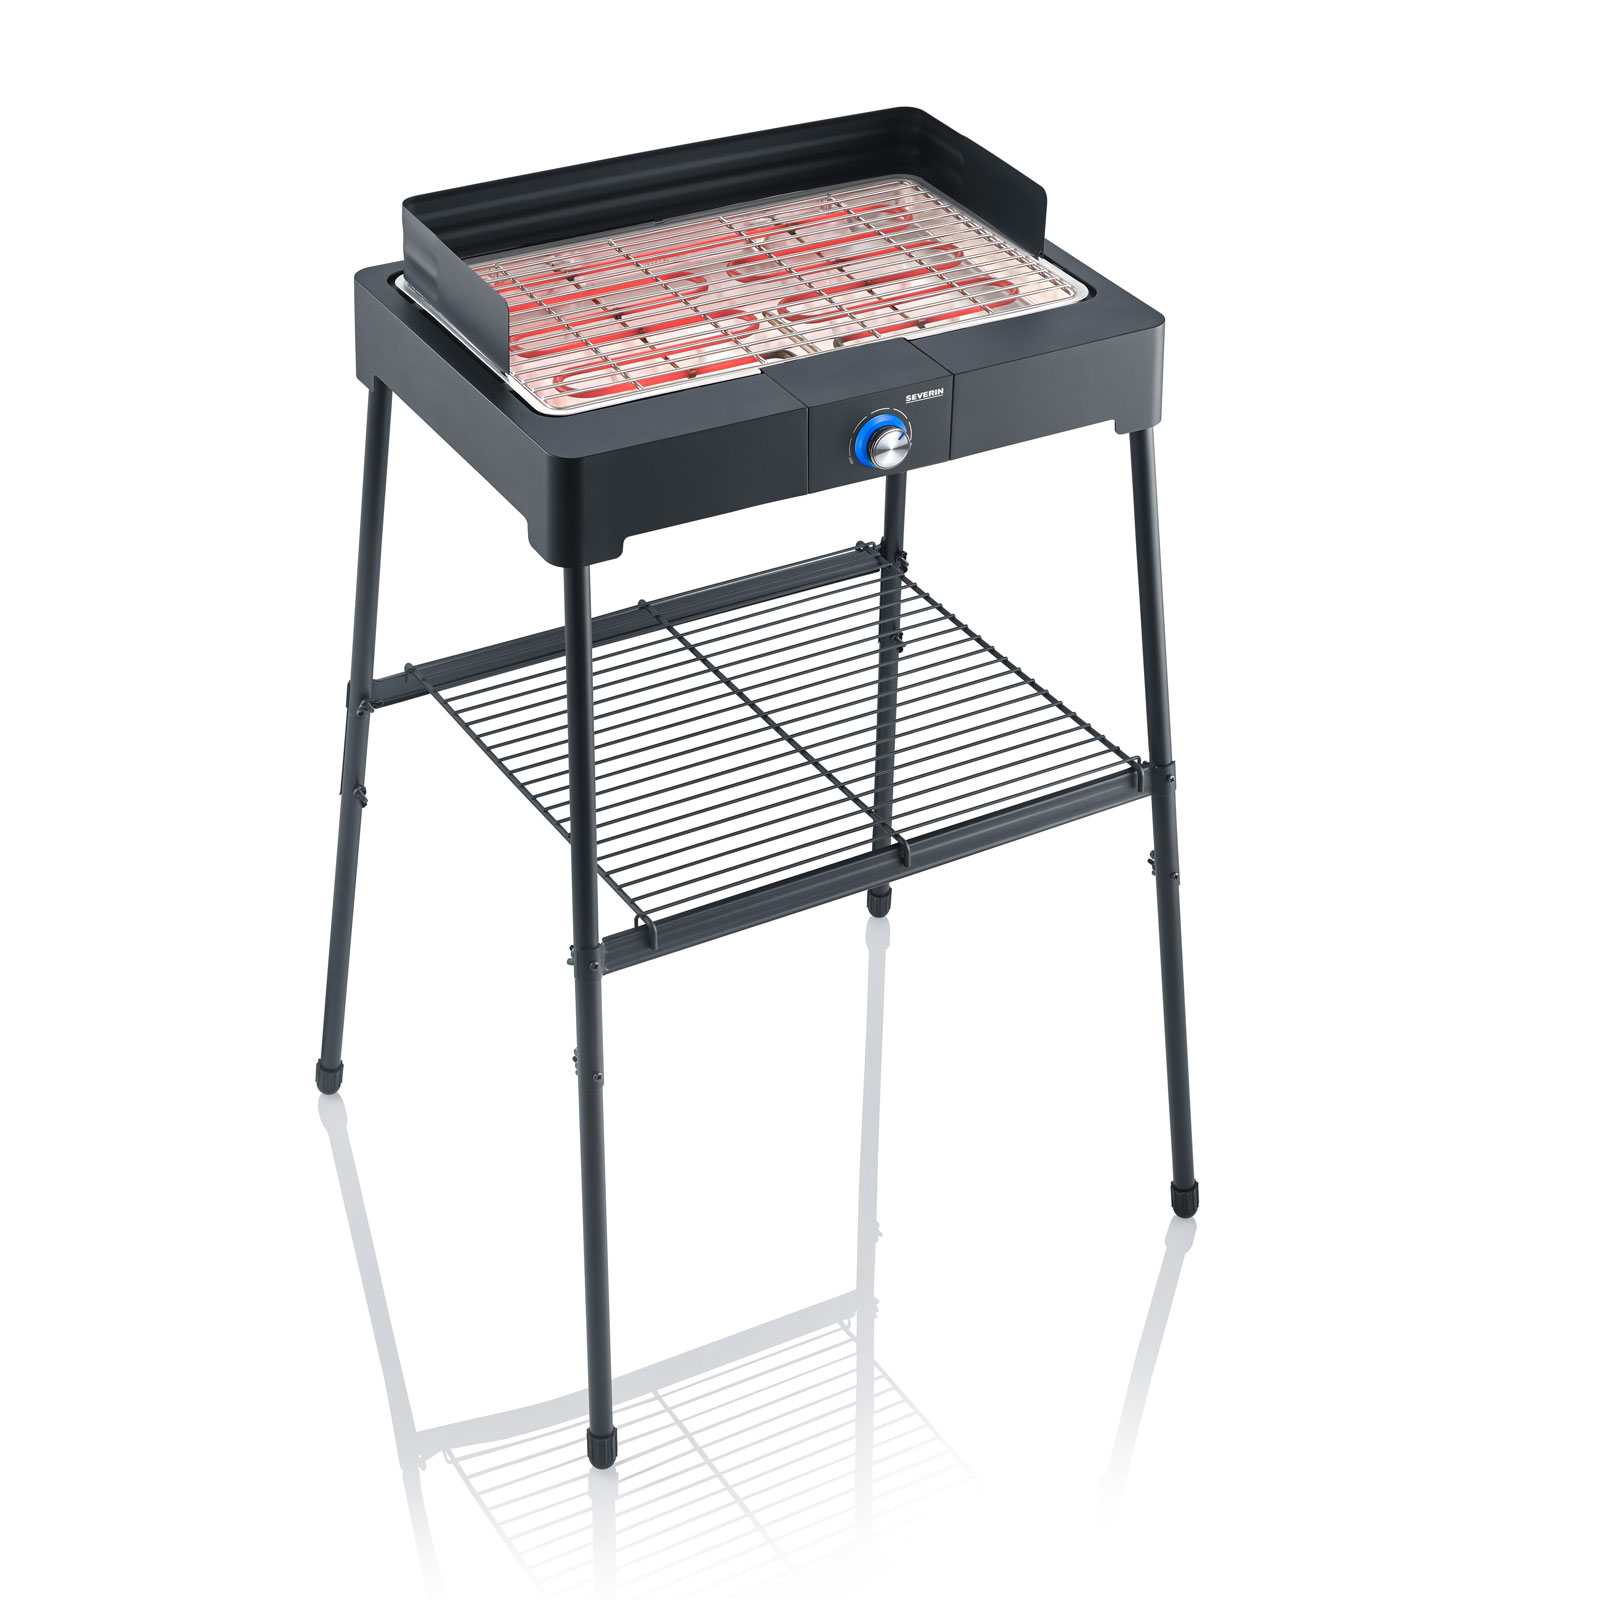 Severin PG 8566 Standgrill